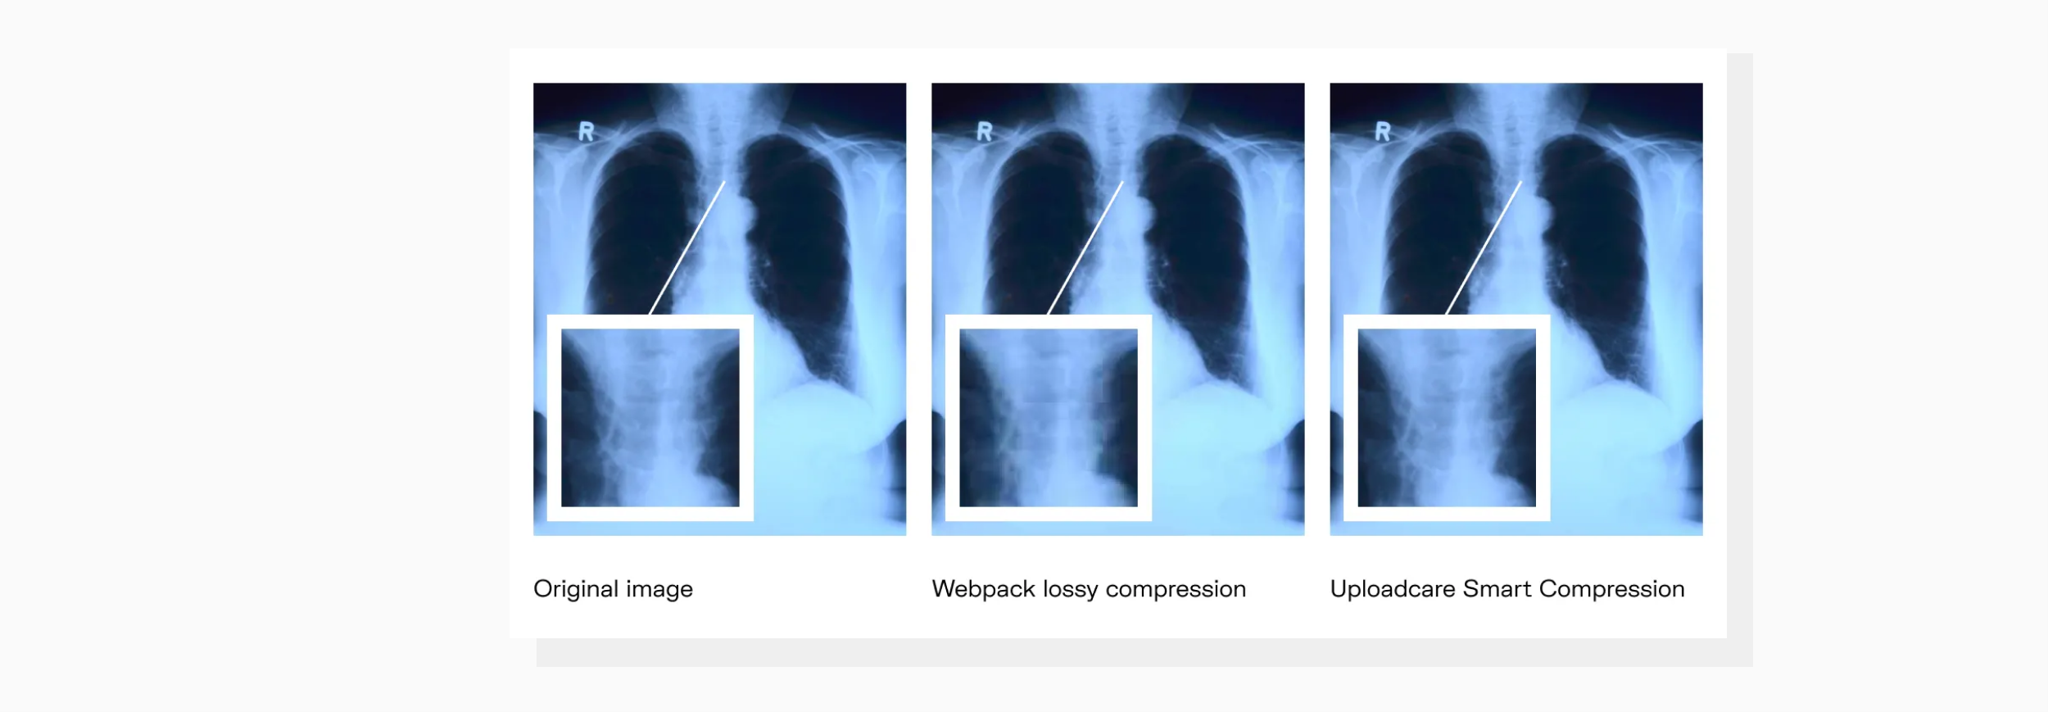 A comparison of Uploadcare Smart Compression with other methods of compression